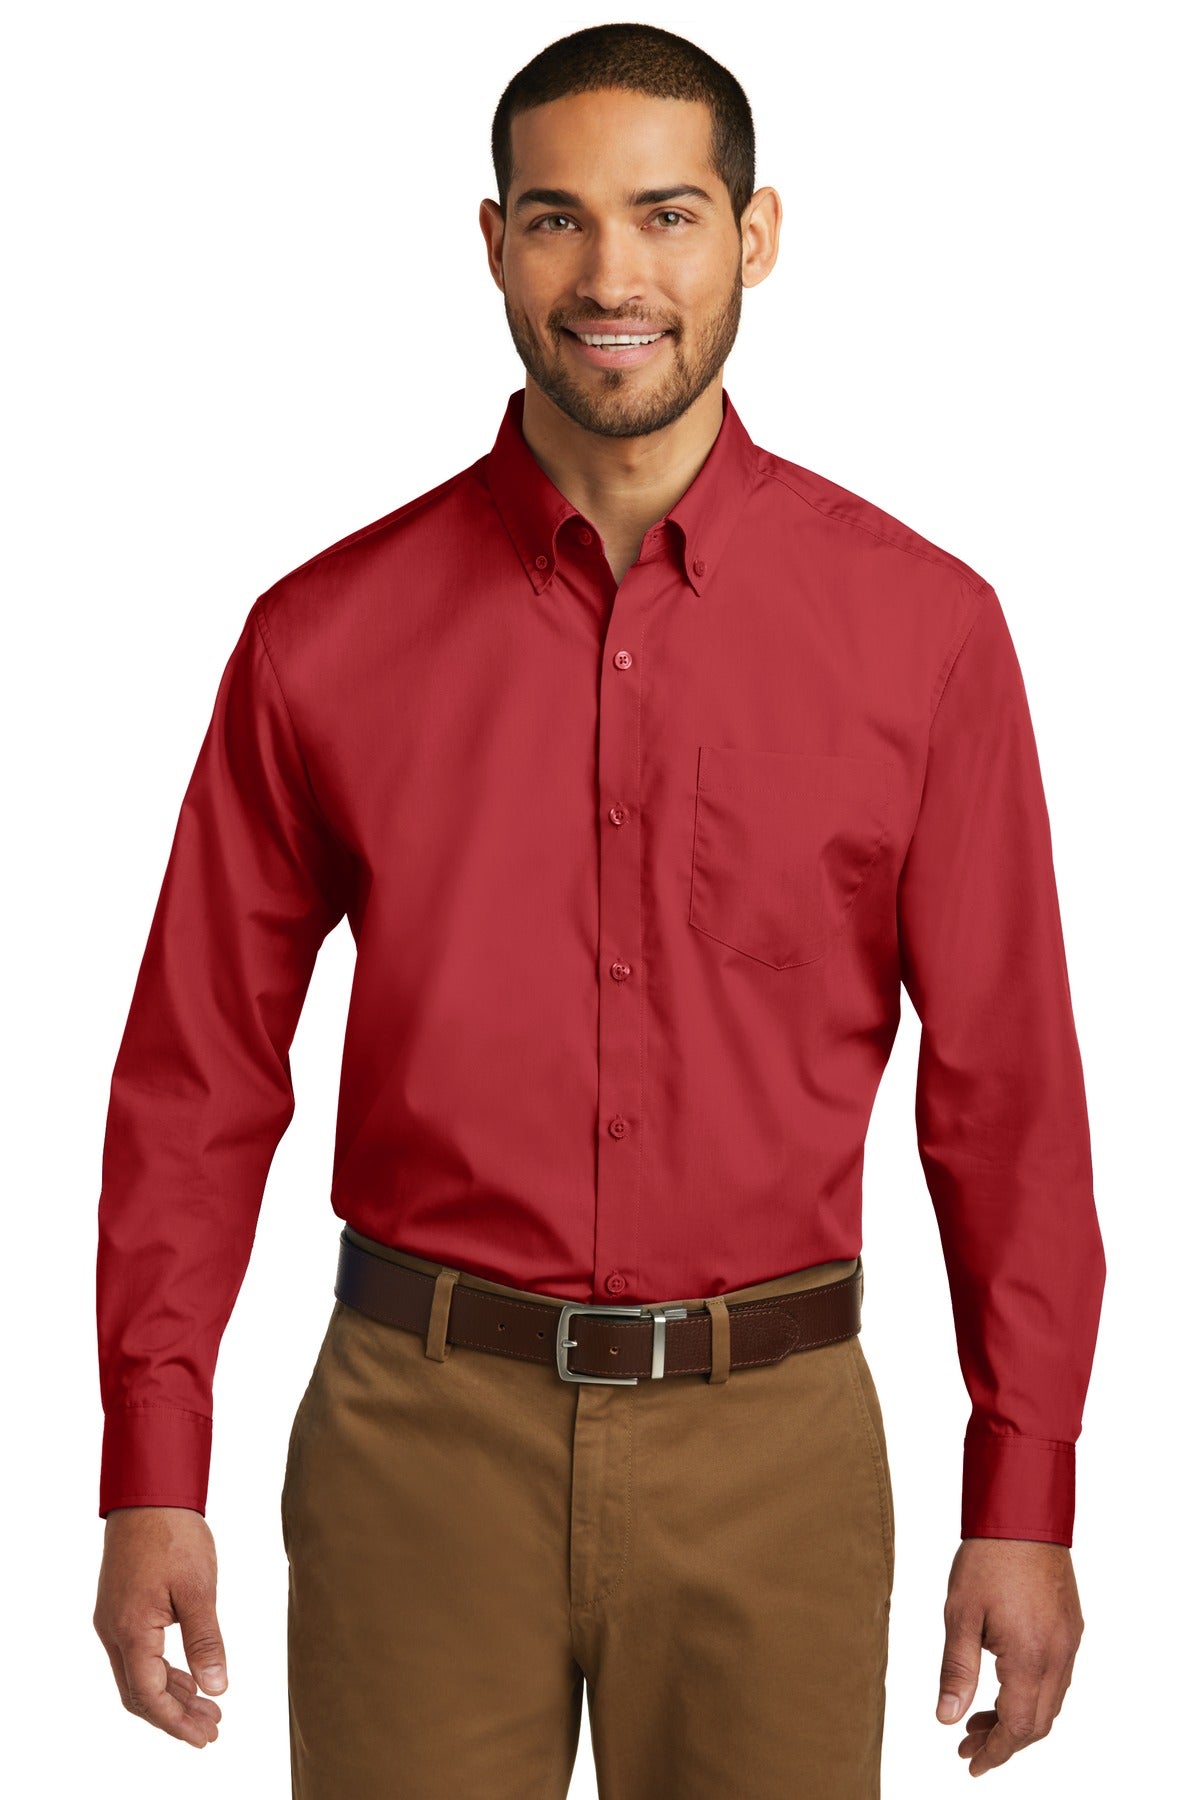 Woven Shirts Rich Red Port Authority